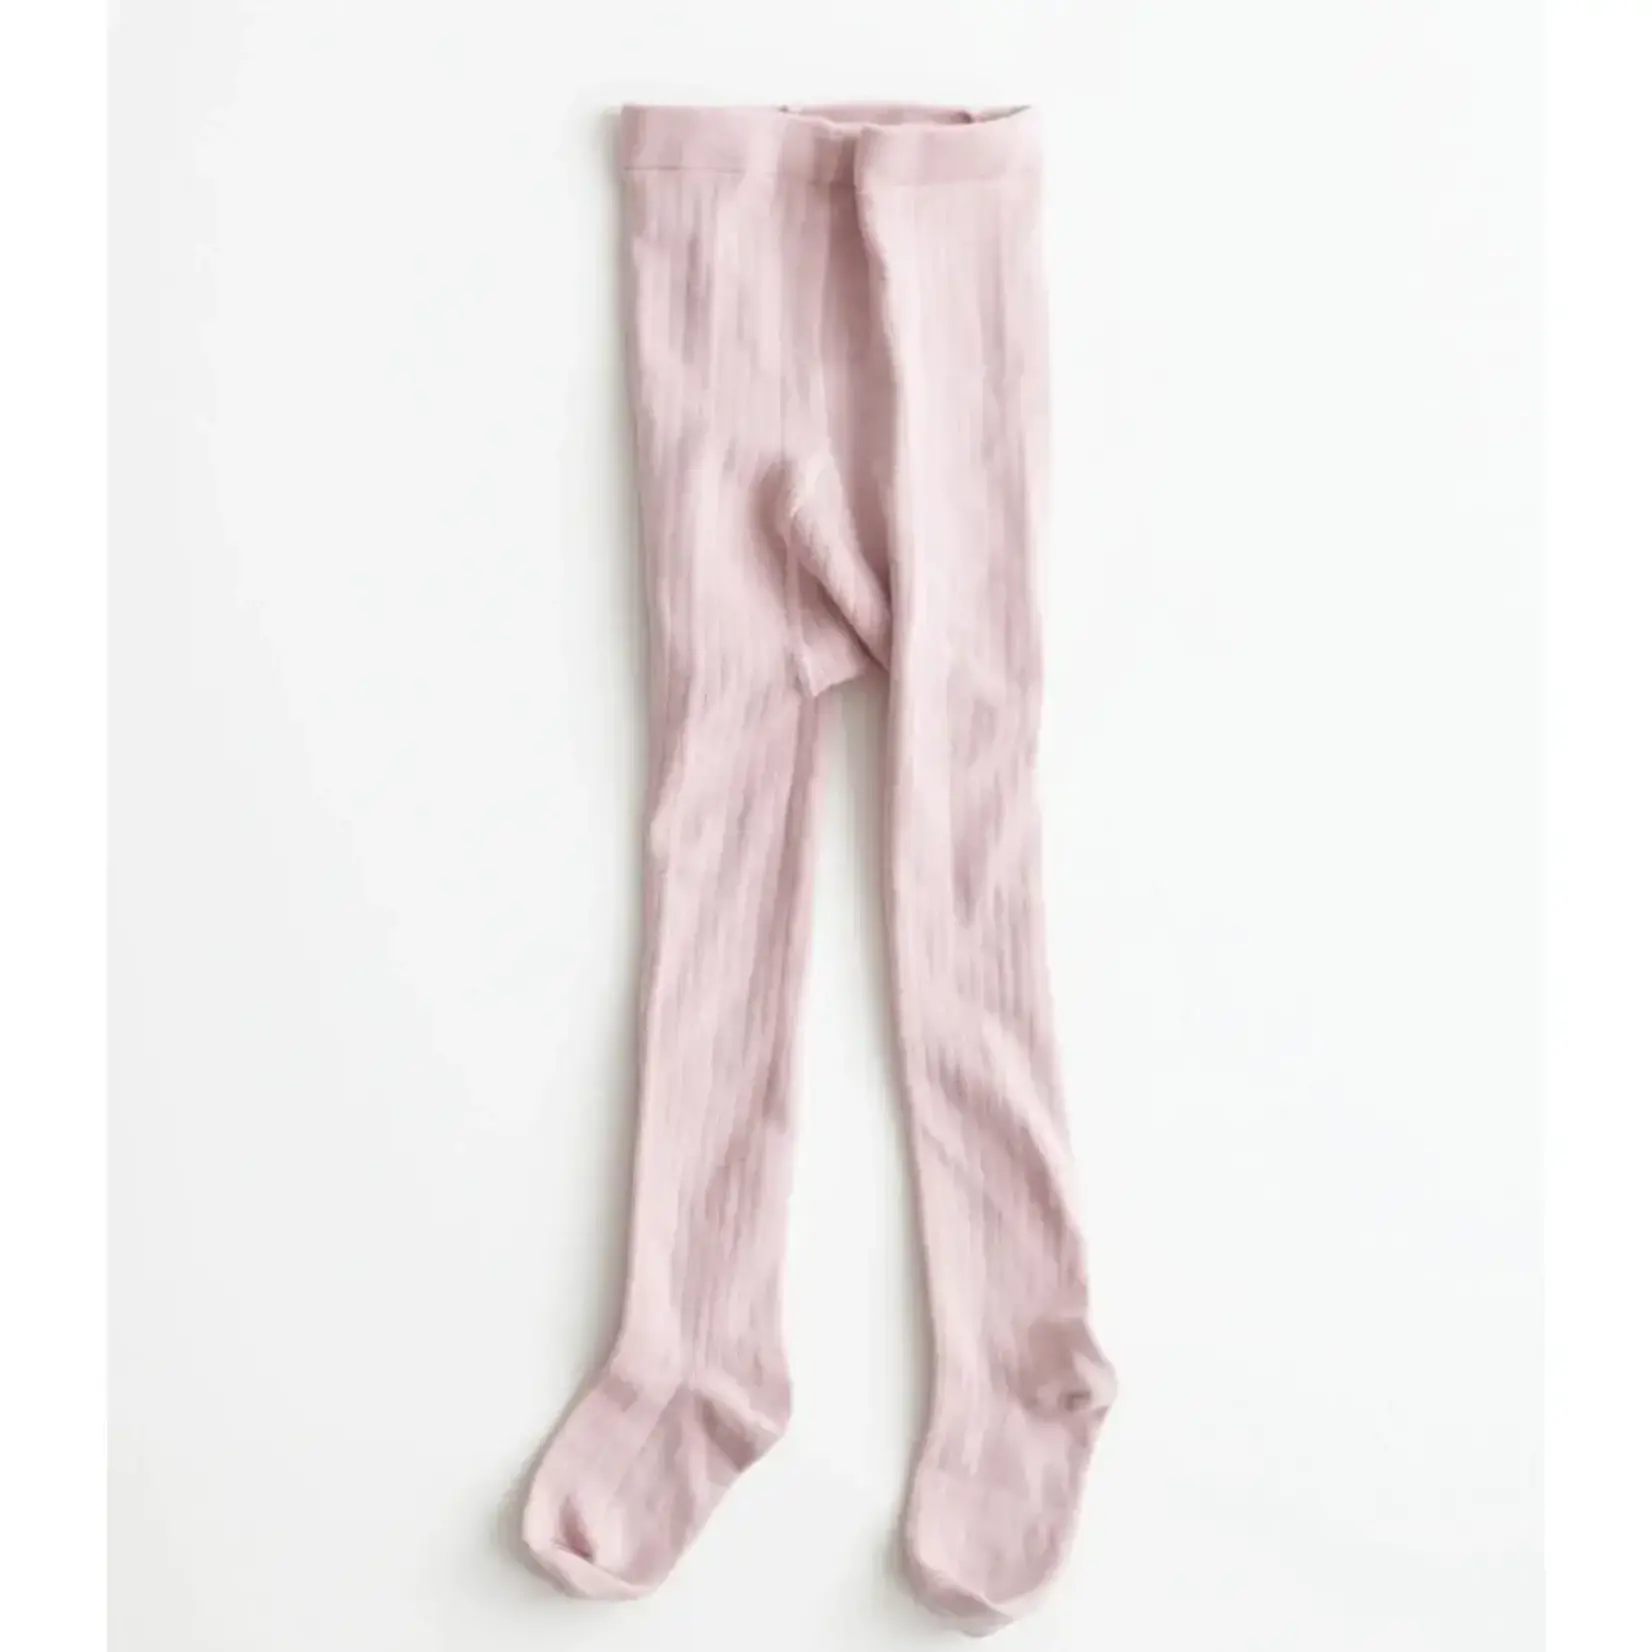 Lali Cotton Tights - Pink - 18M